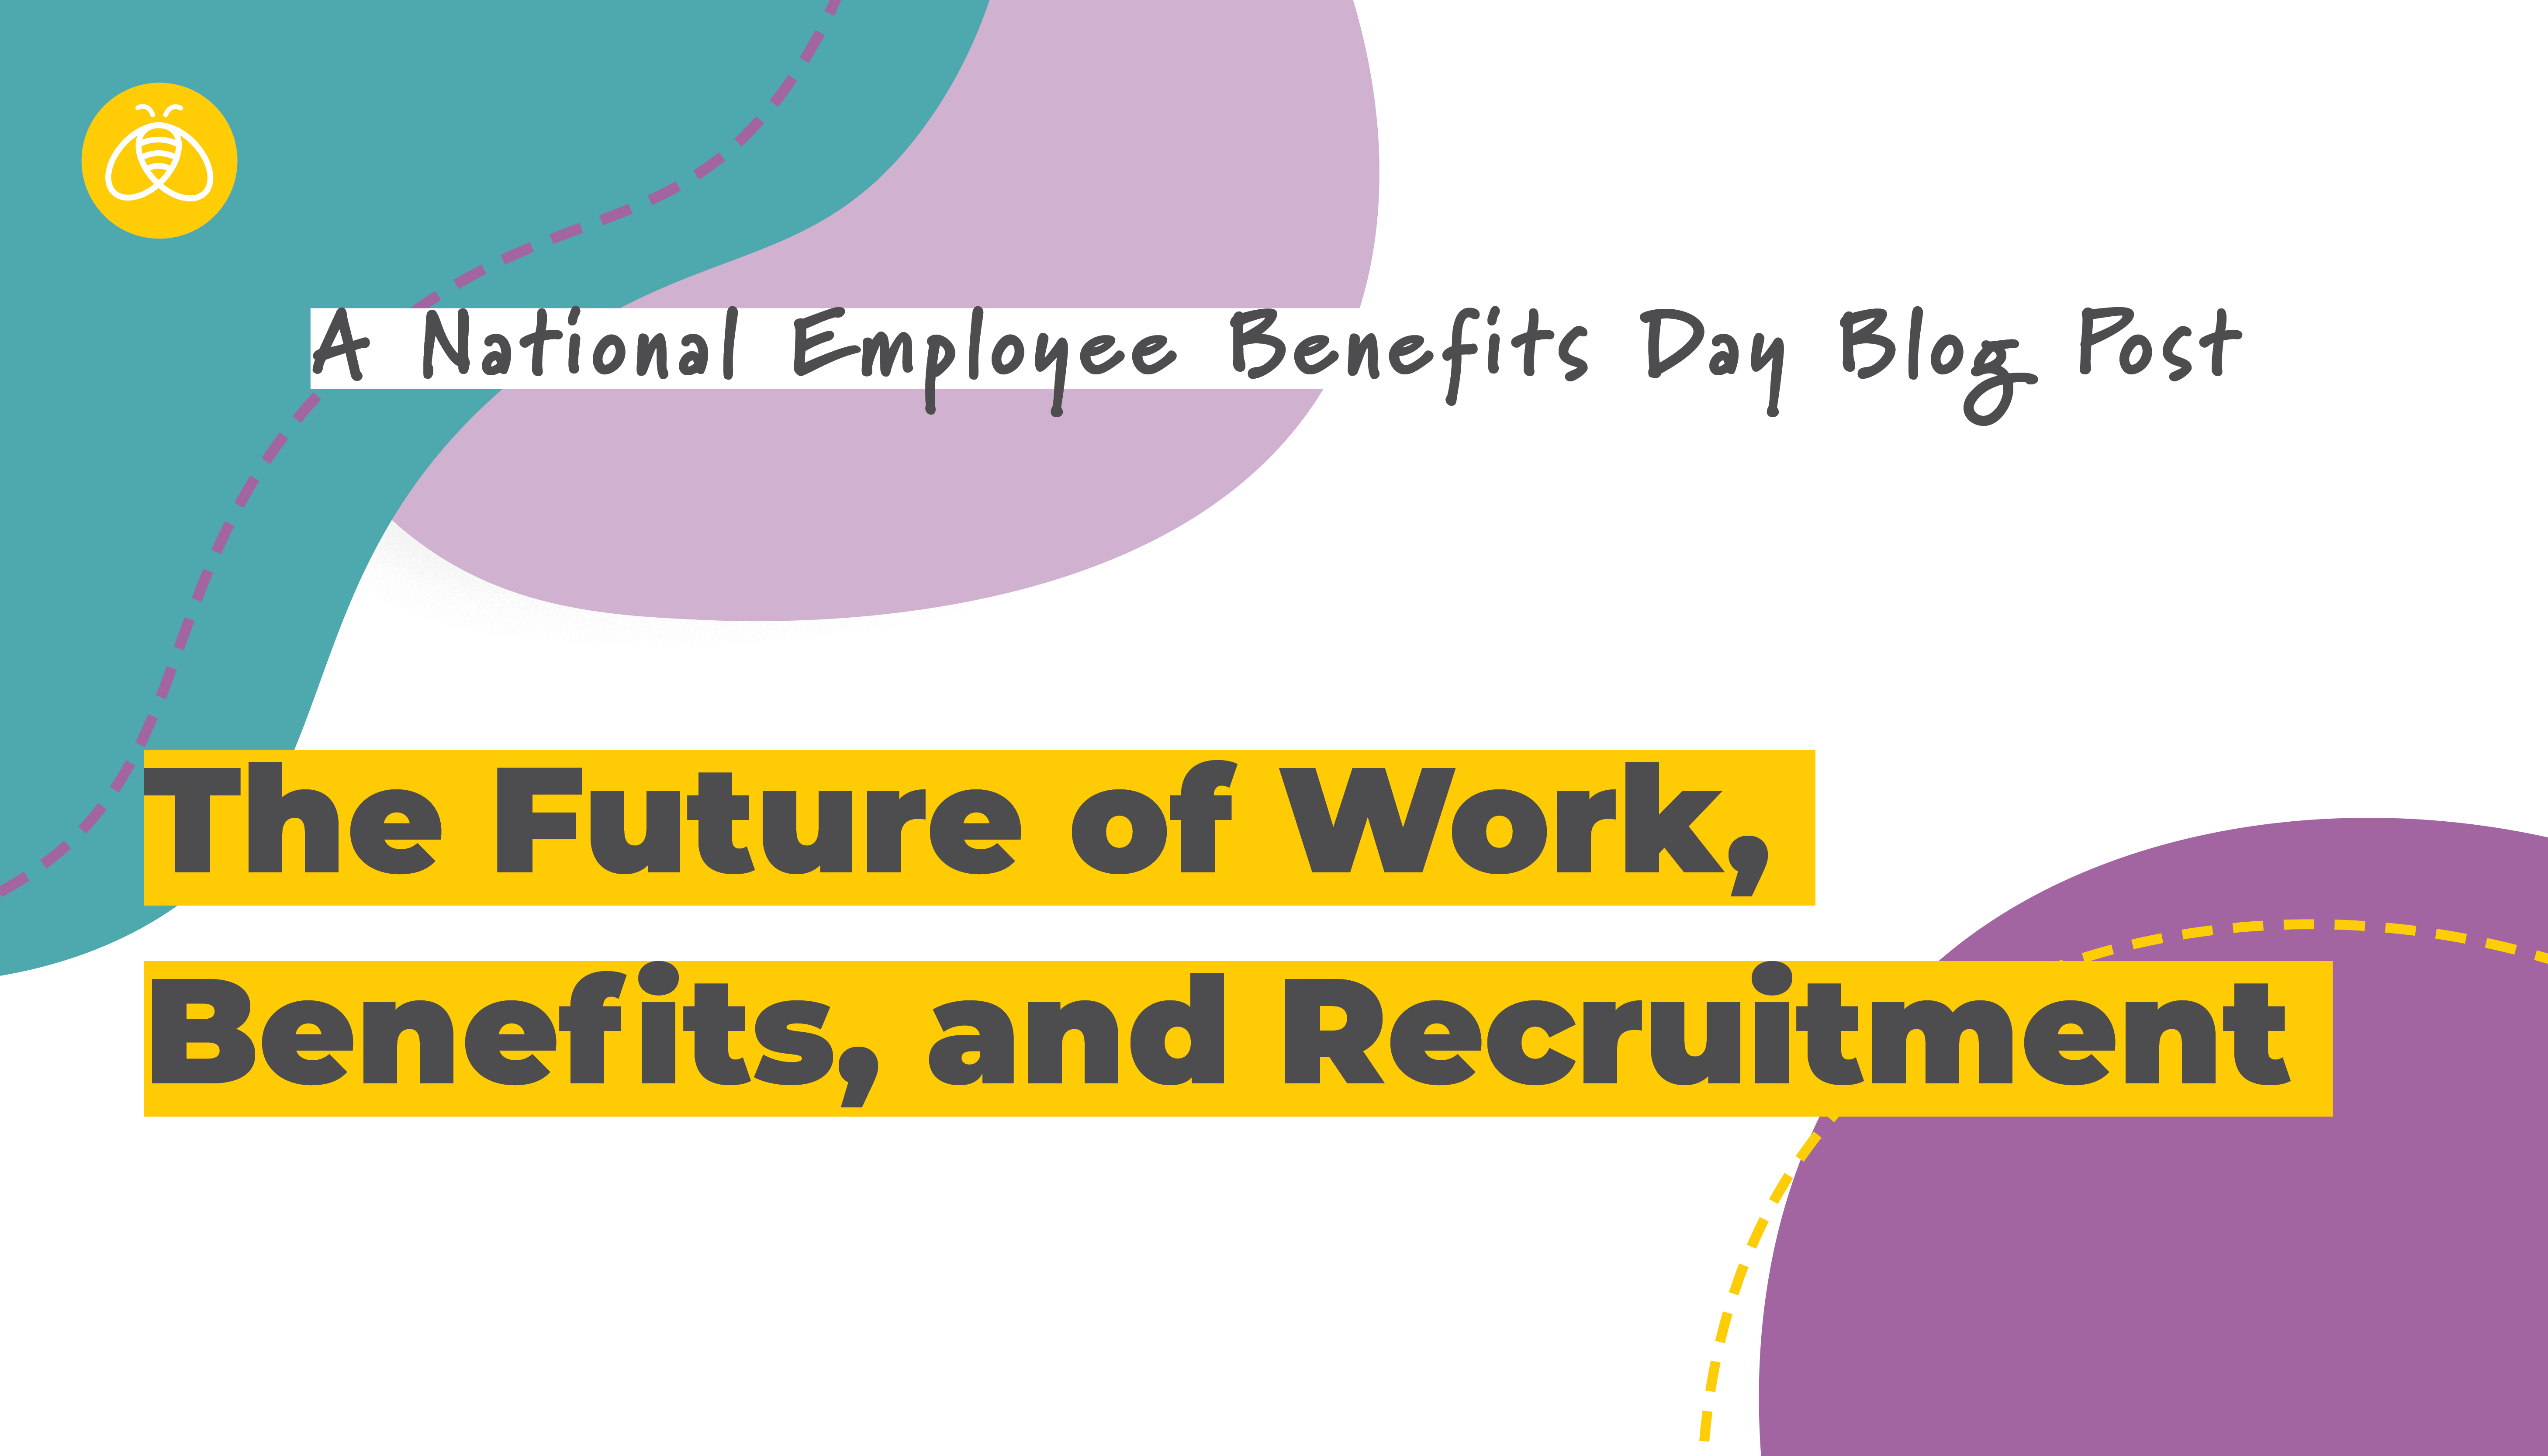 Employee Benefits Innovation: the Future of Work, Benefits, and Recruitment